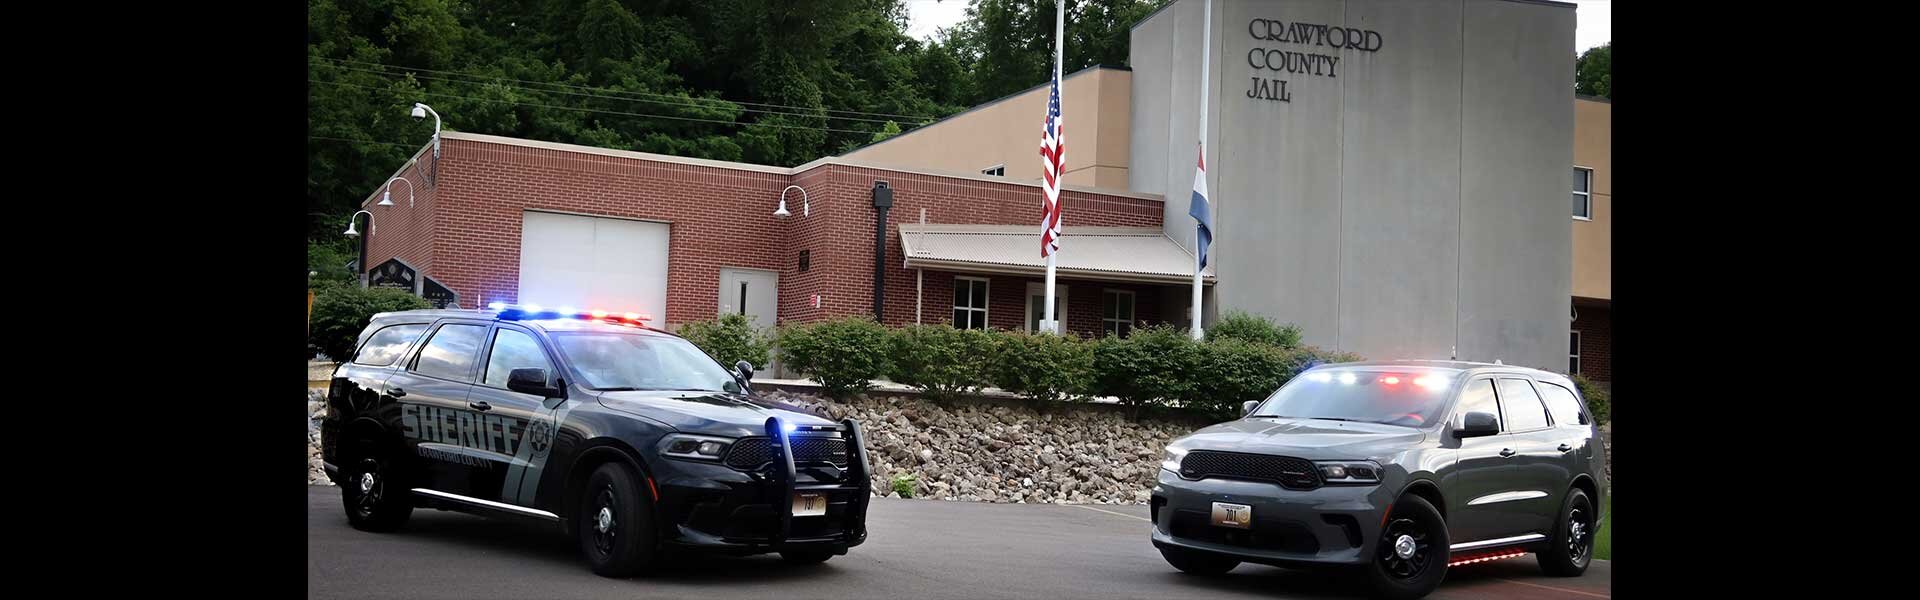 Patrol Vehicles in front of Crawford County Jail Building